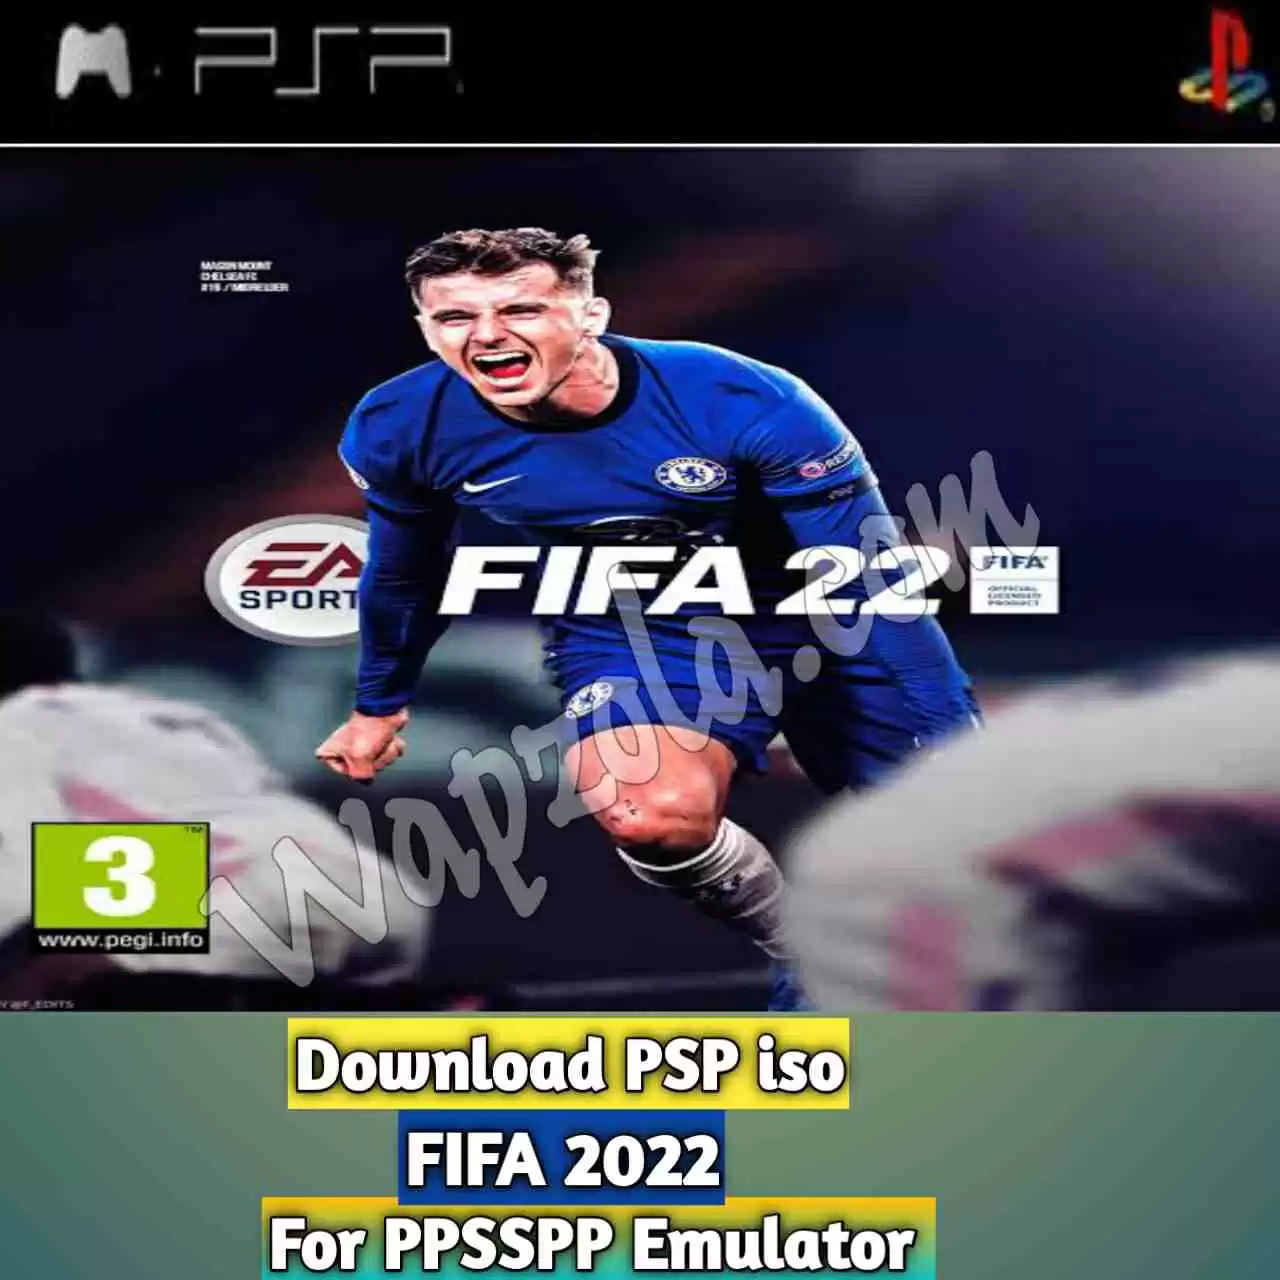 NOVO! FIFA 22 PPSSPP ISO File Download para Android - FIFA 2022